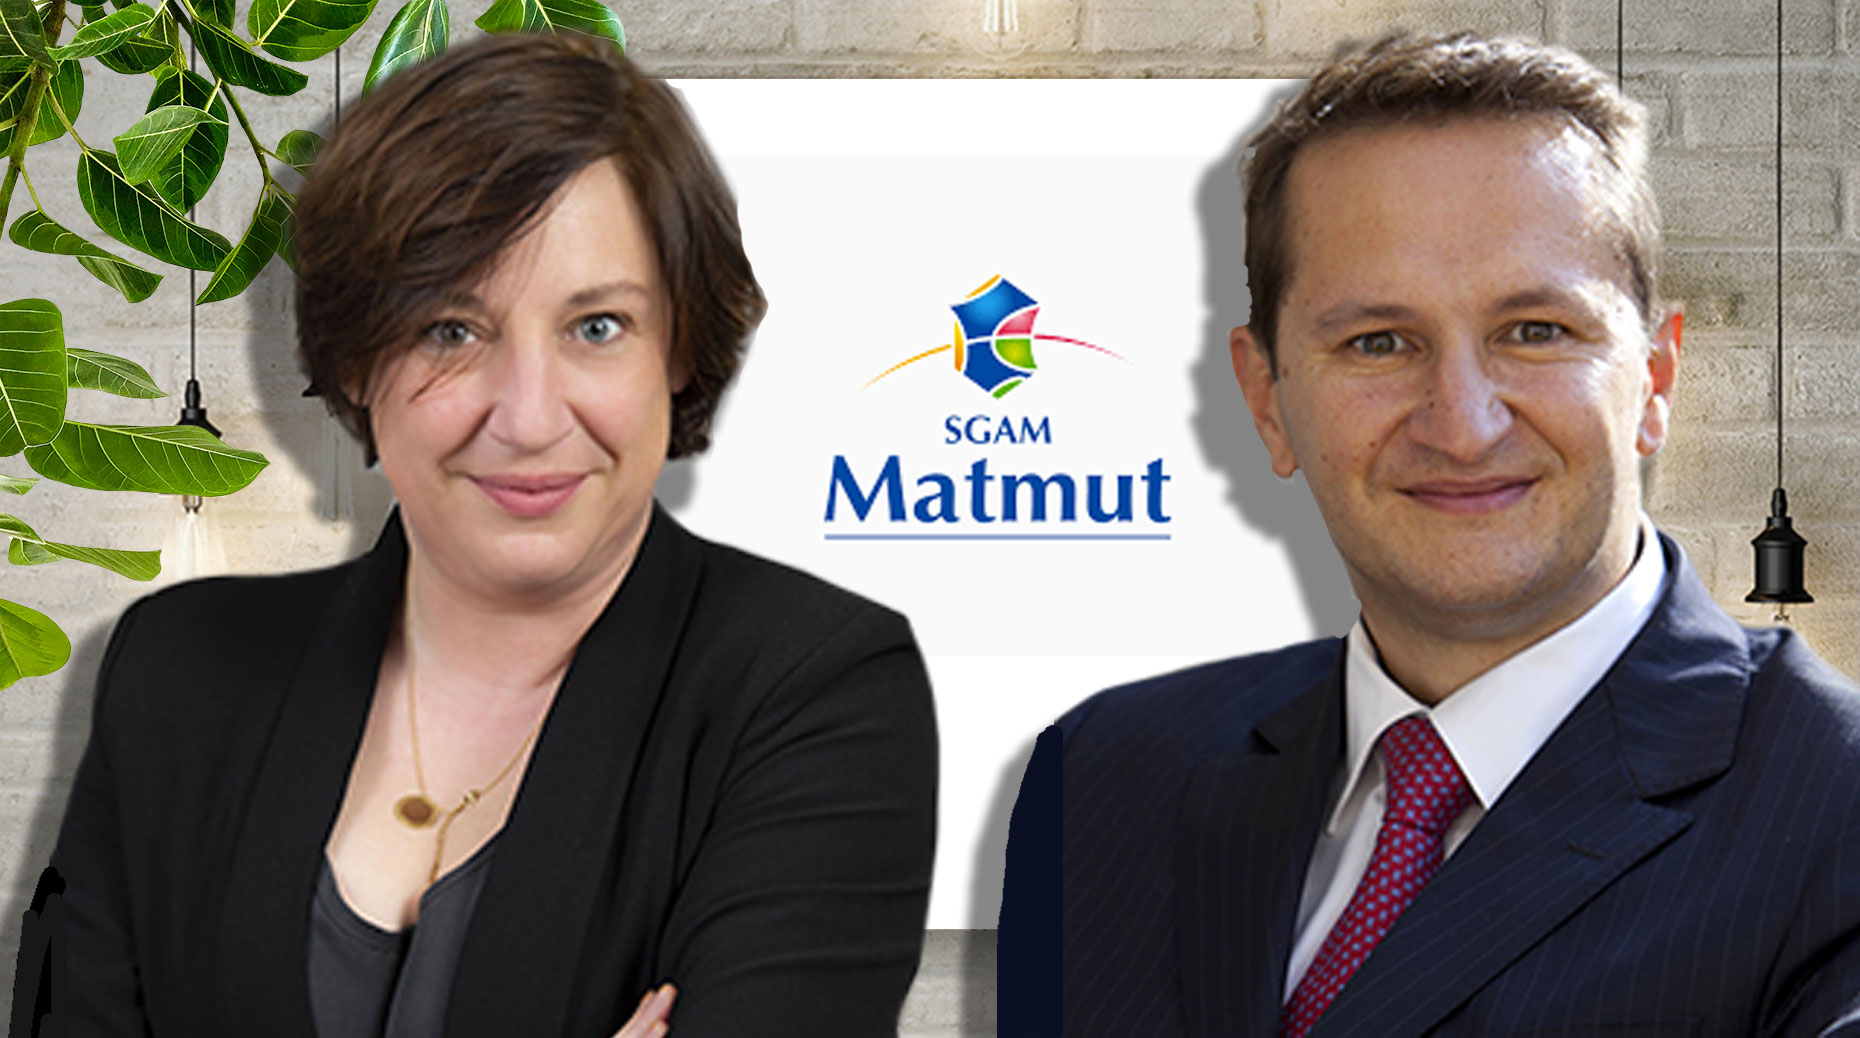 Portrait of Stéphanie Boutin and Emmanuel Petit in front of Matmut logo